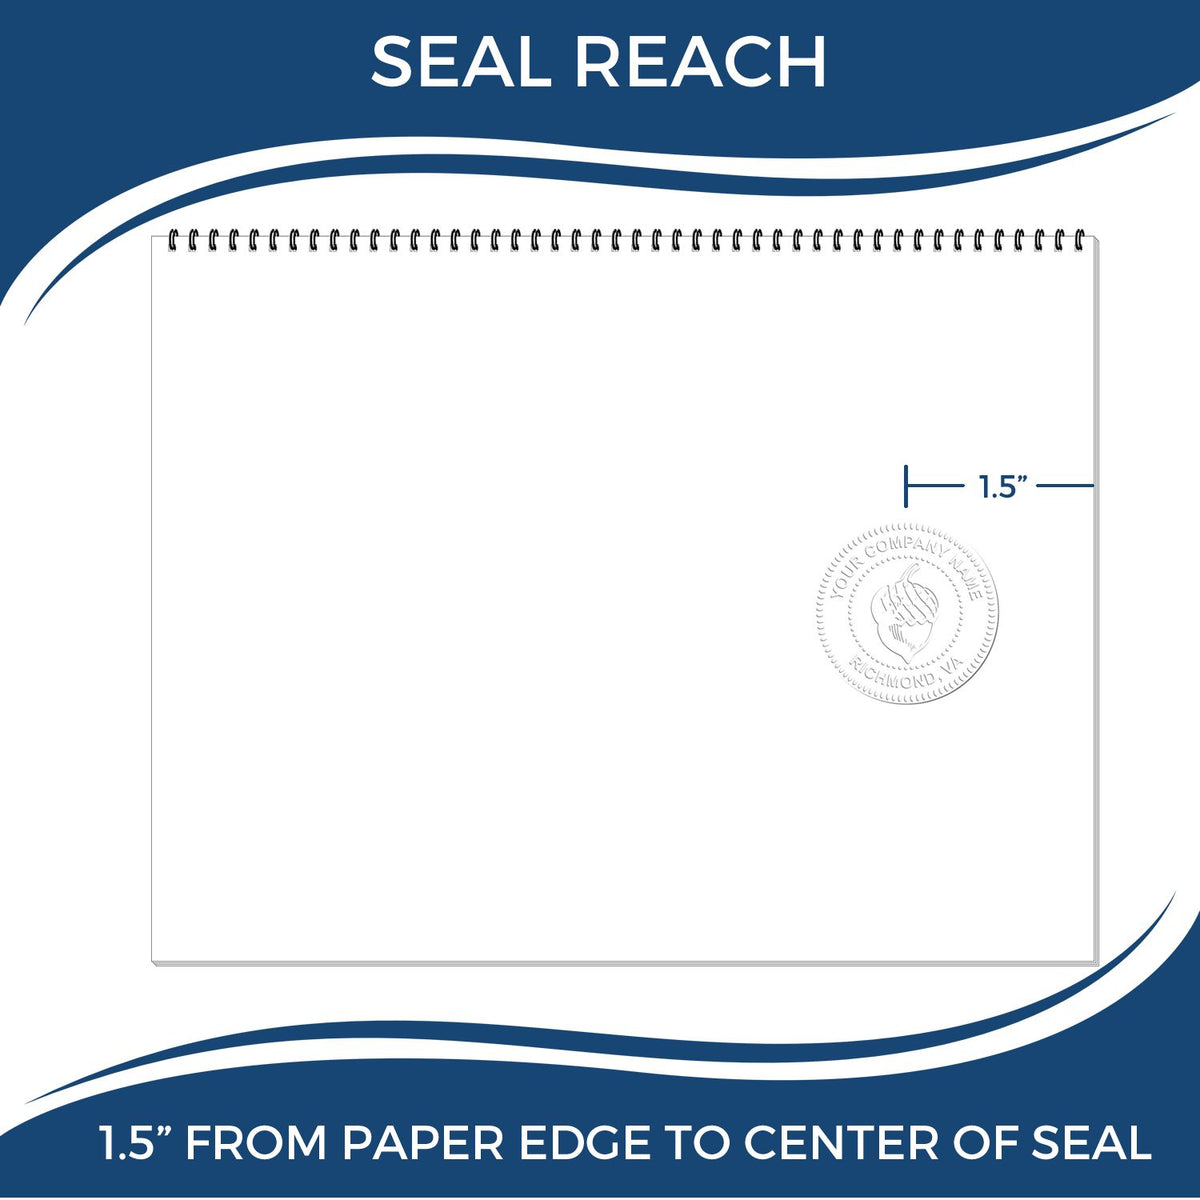 An infographic showing the seal reach which is represented by a ruler and a miniature seal image of the State of Wyoming Soft Land Surveyor Embossing Seal